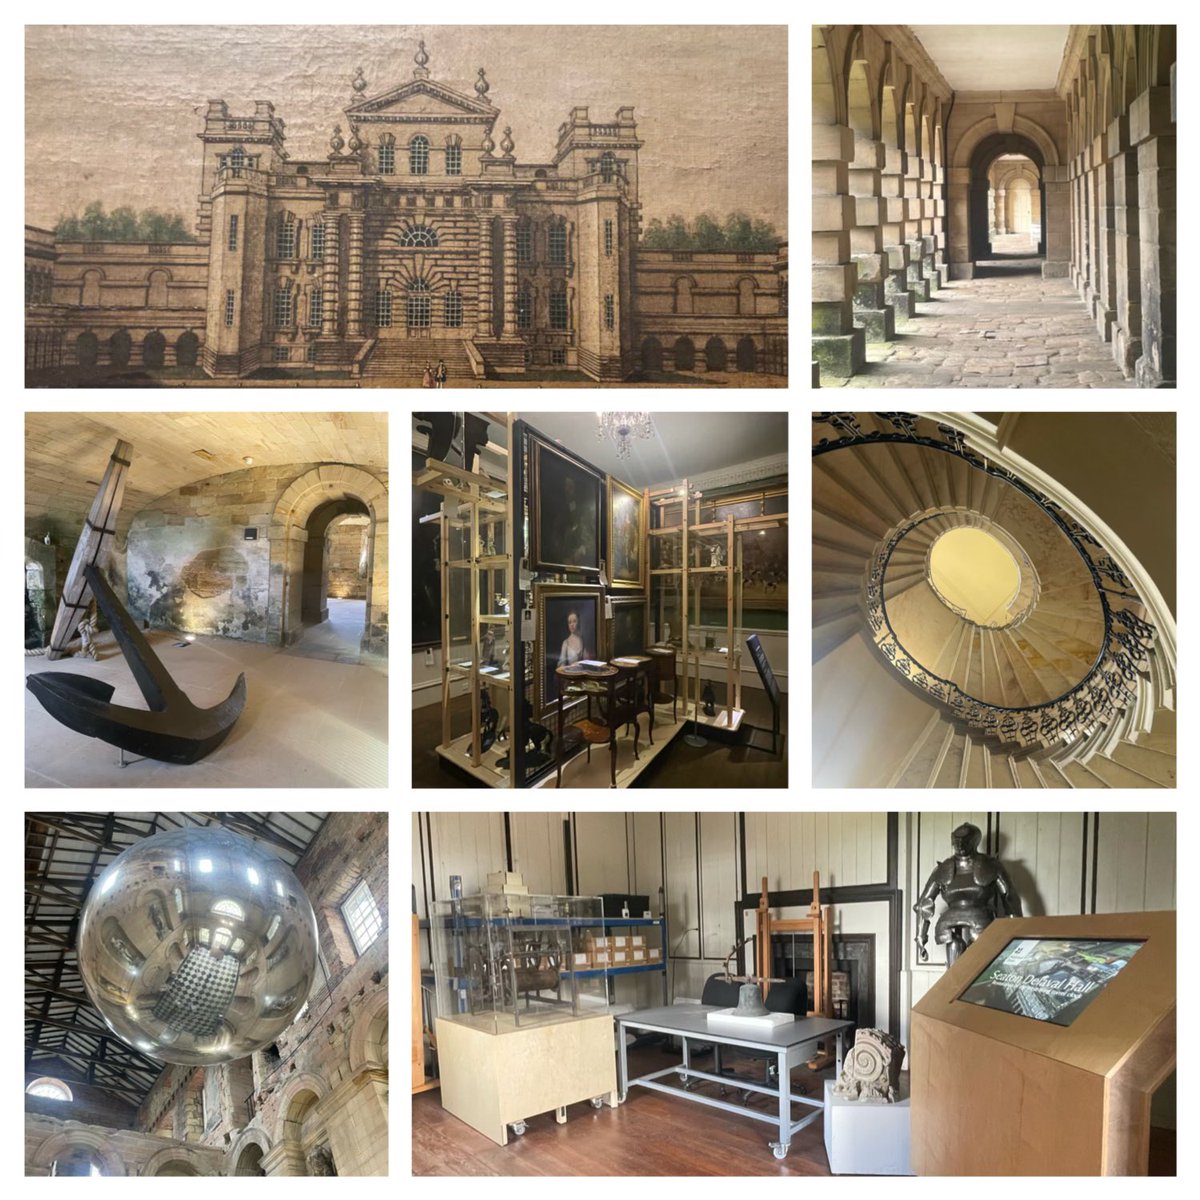 A masterclass in curation, conservation and creativity. The accessible collection stores and reimagined spaces @SeatonDelavalNT were a joy to explore. nationaltrust.org.uk/visit/north-ea…